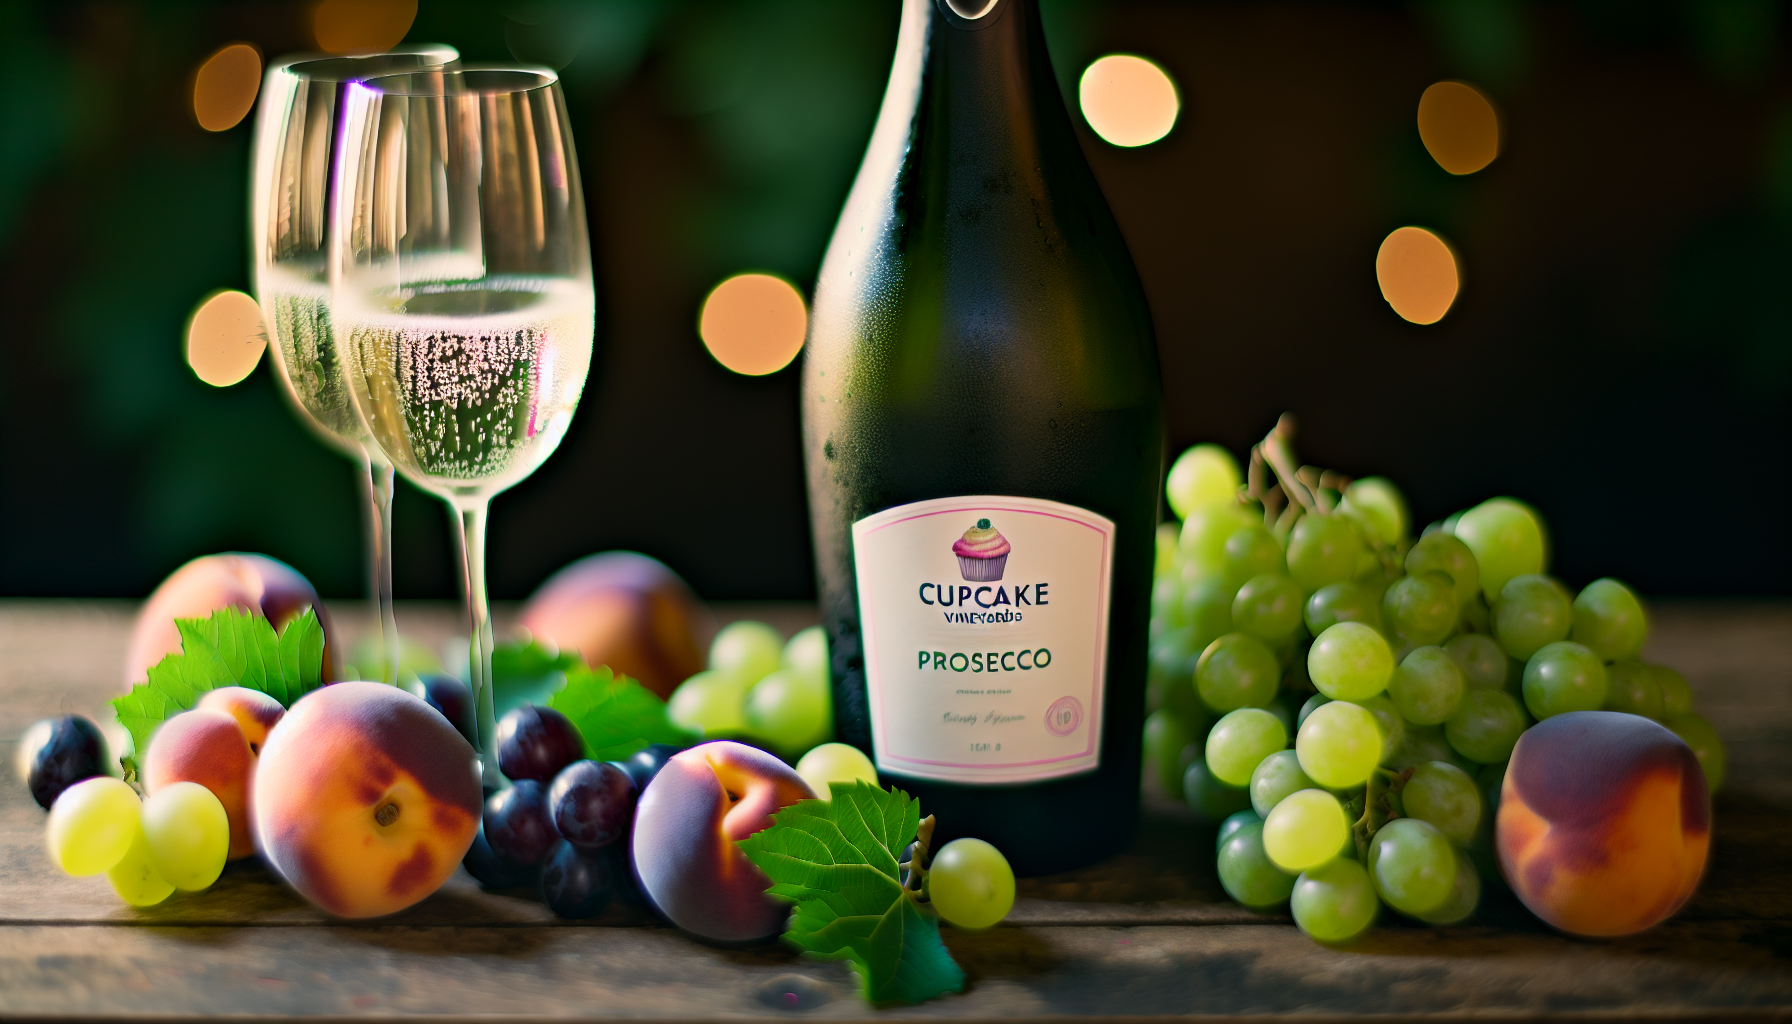 A bottle of Cupcake Vineyards Prosecco surrounded by grapes, white peach, and refreshing bubbly